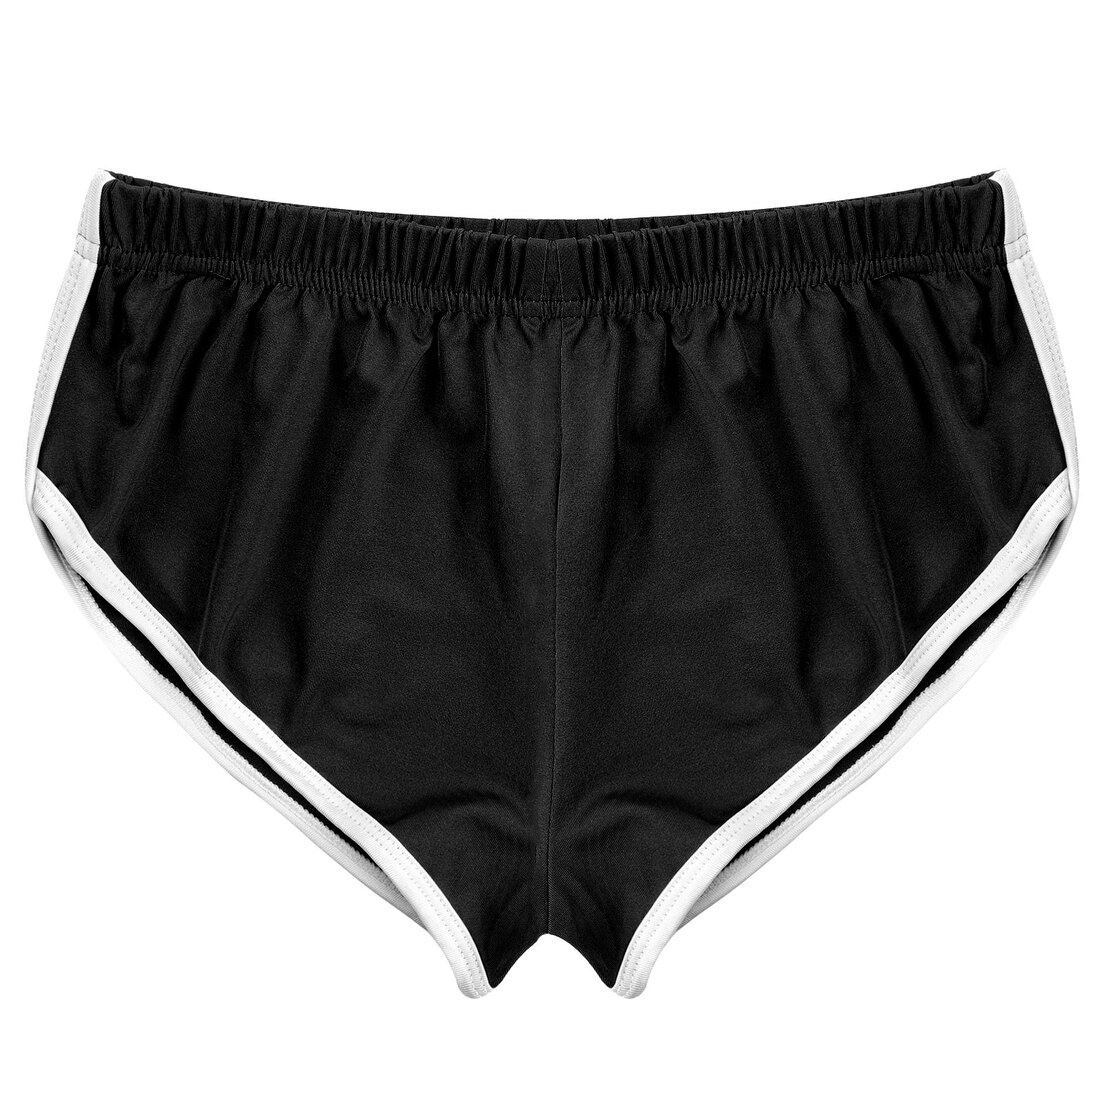 Women's Spandex Mid-rise Elastic Shorts / Sexy Adult Shorts with White Edge - EVE's SECRETS